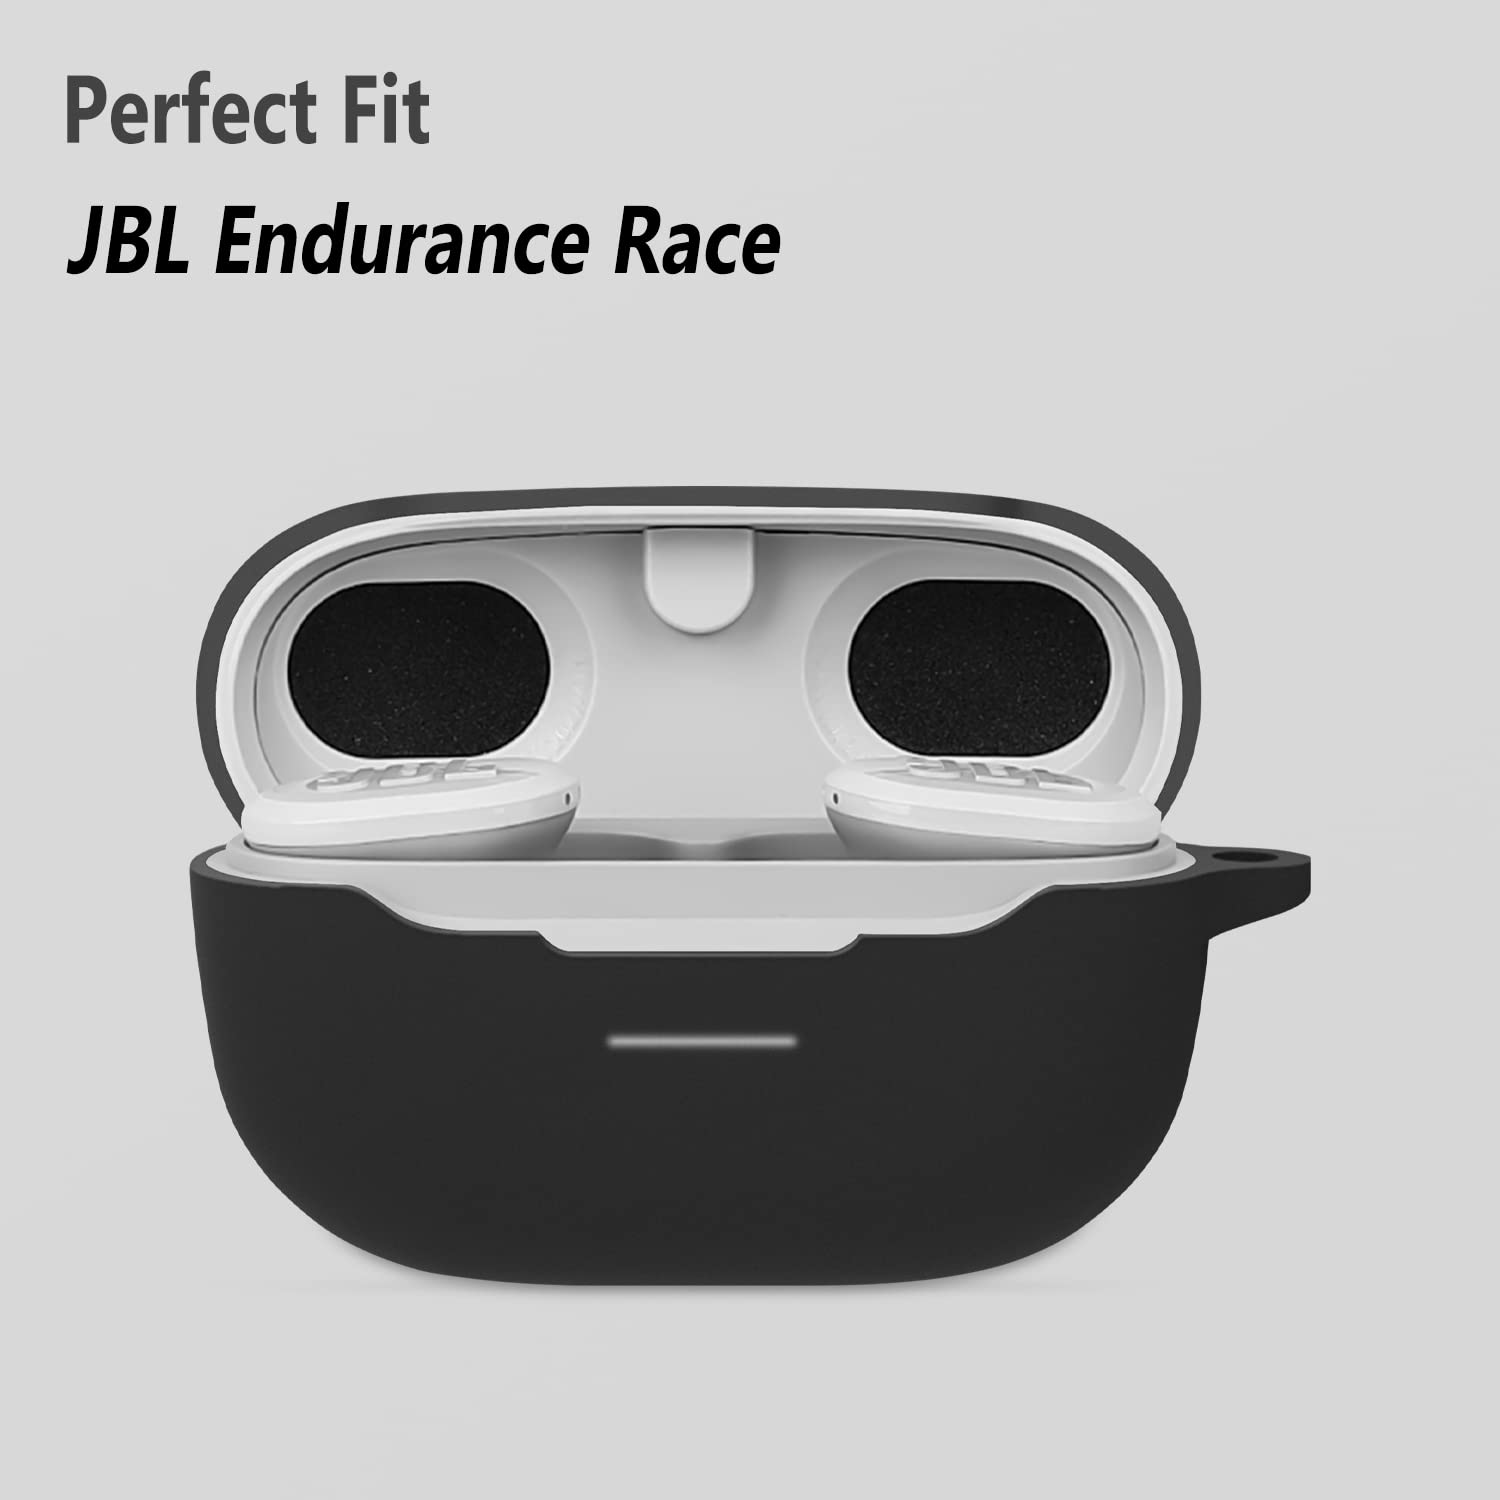 Geiomoo Silicone Case Compatible with JBL Endurance Race, Protective Cover with Carabiner (Black)